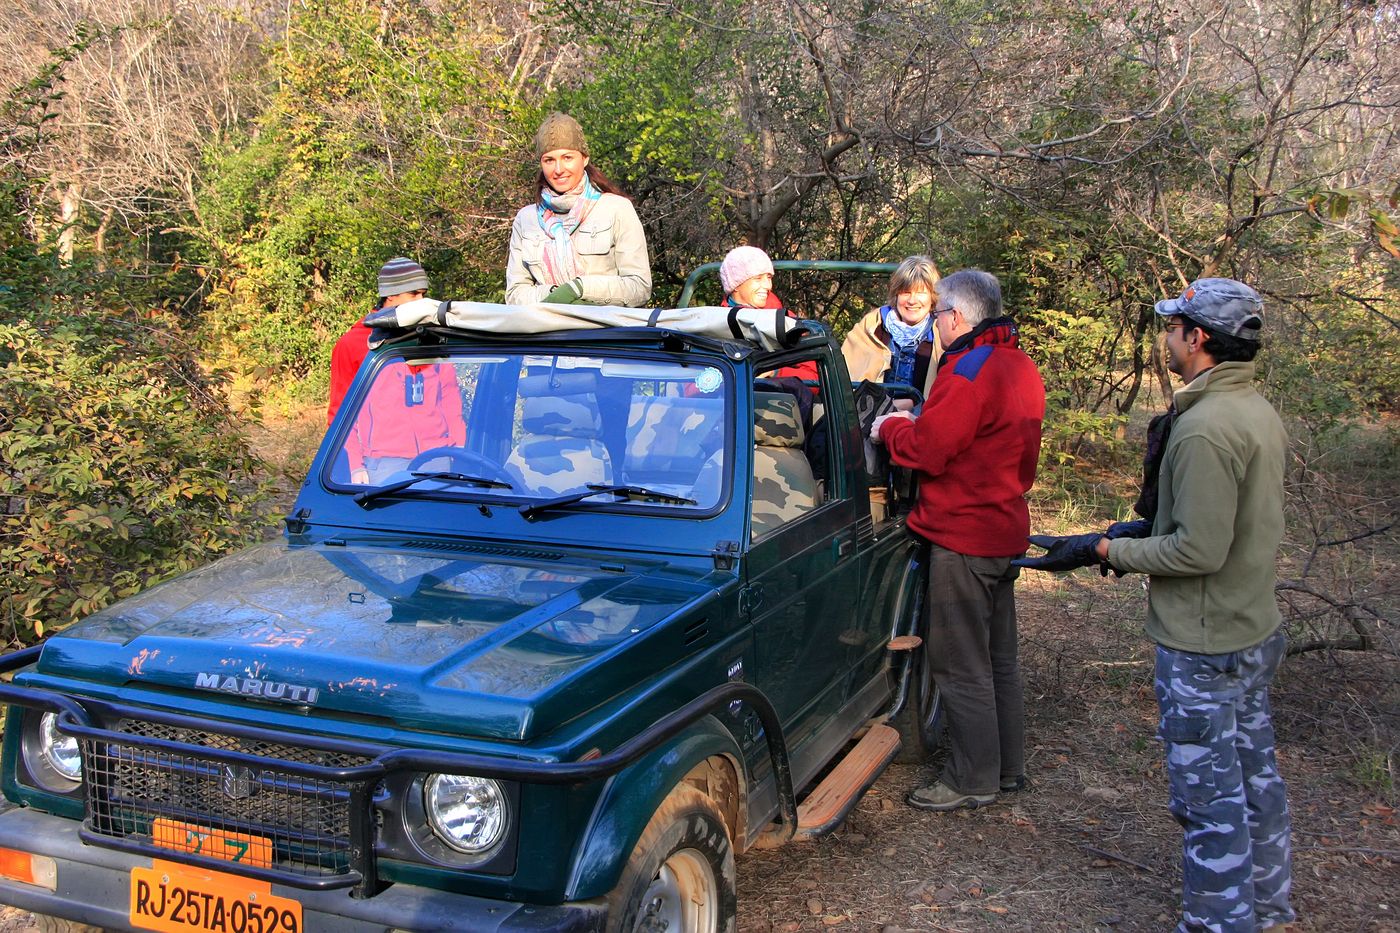 Tourists accompanied by their guide on a safari in Ranthambore Reserve, amongst the largest parks in the state of Rajasthan